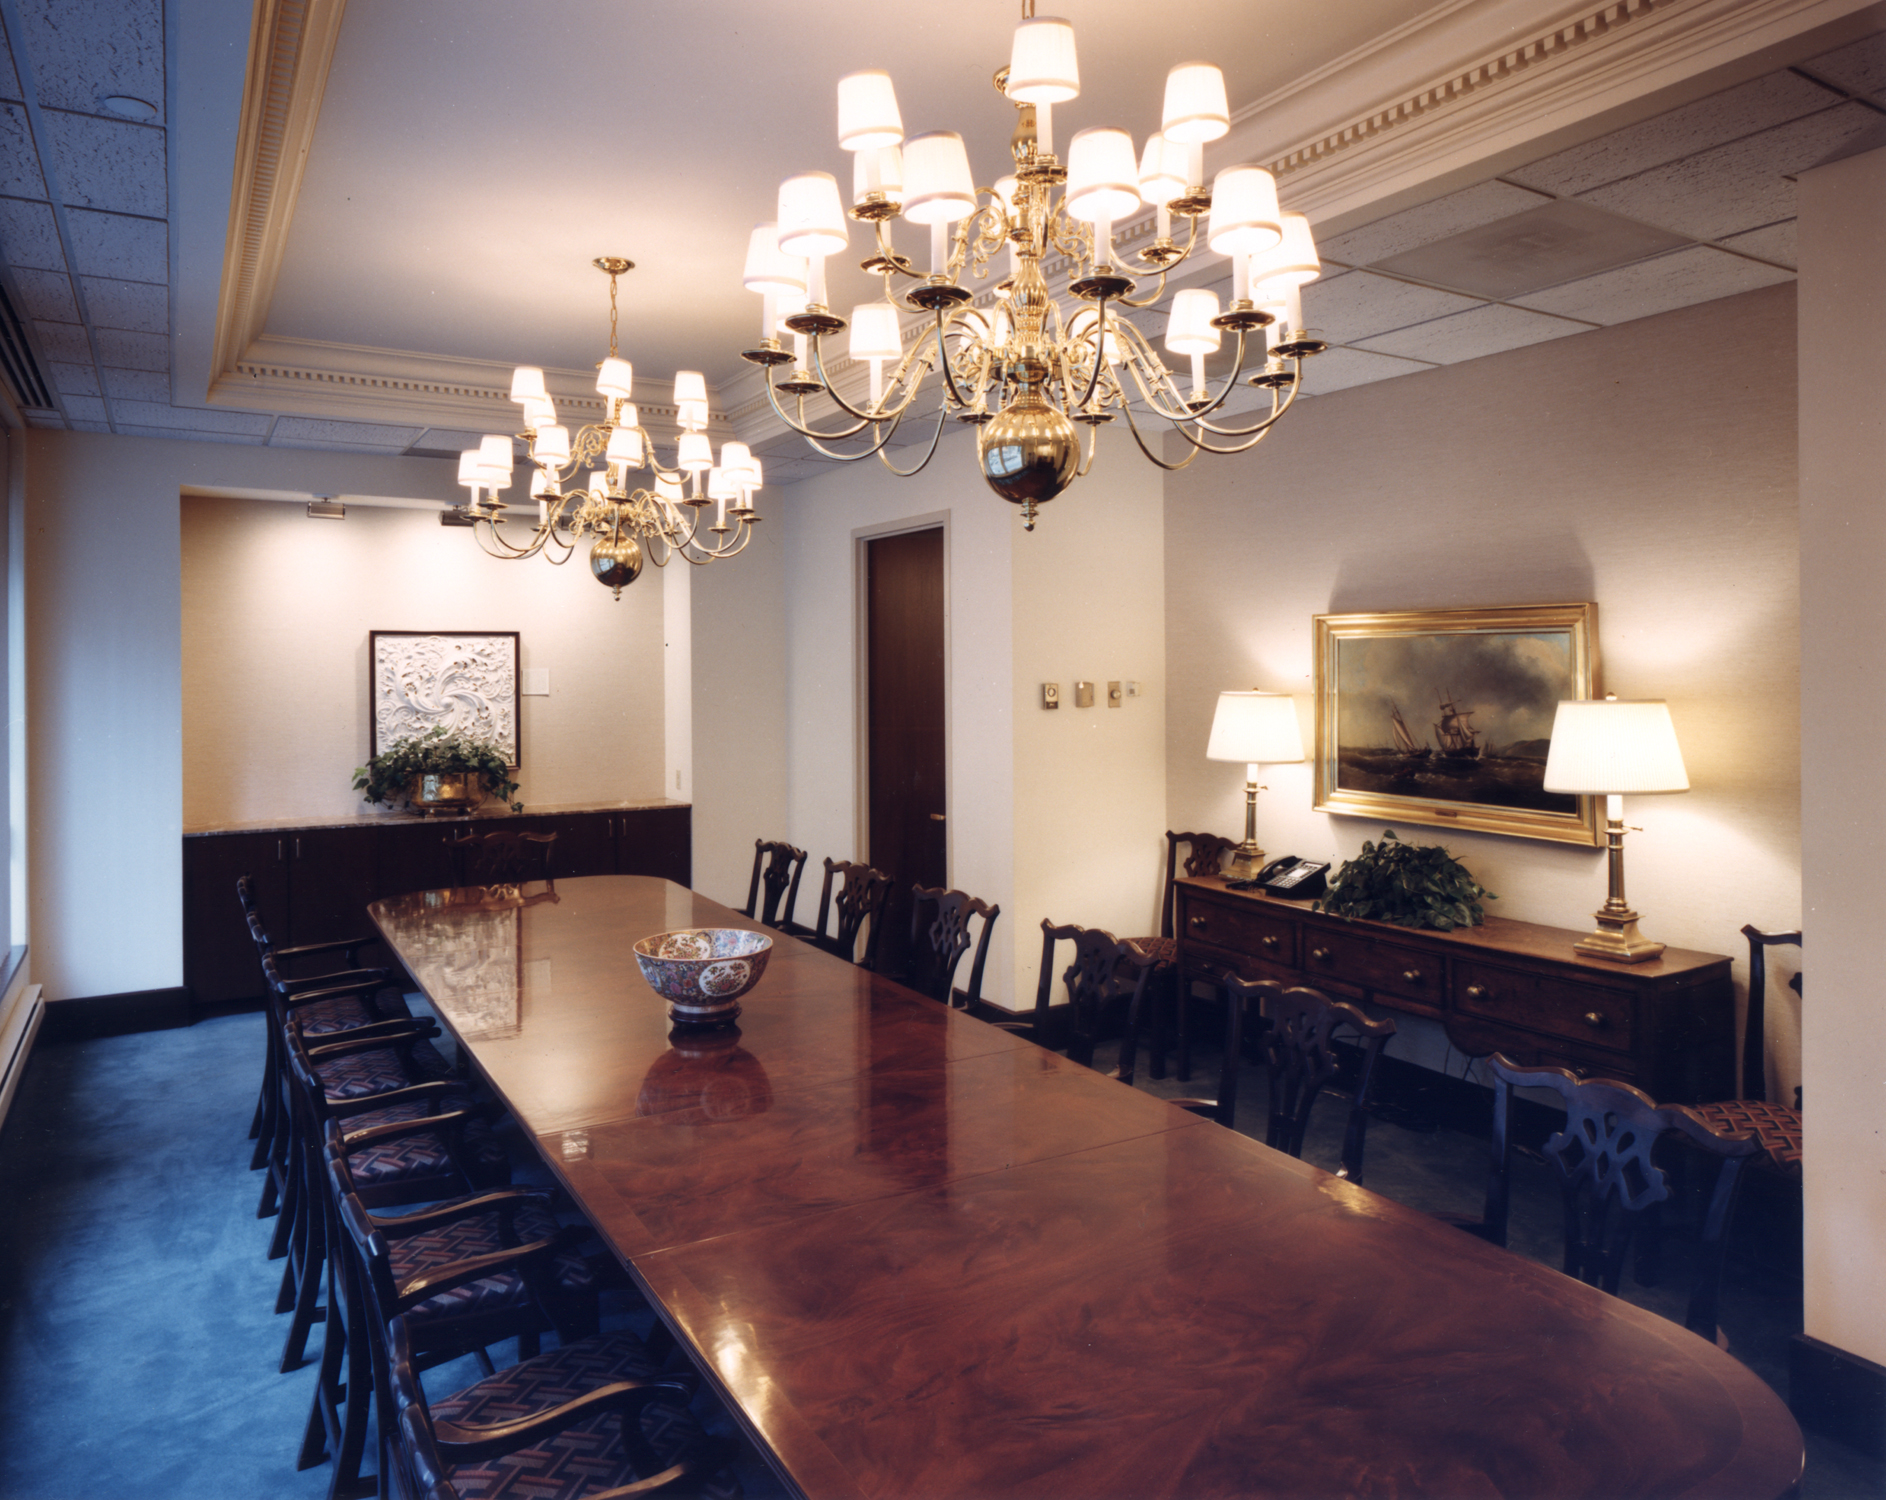 pho-int-conference room-300ppi-6x5.jpg